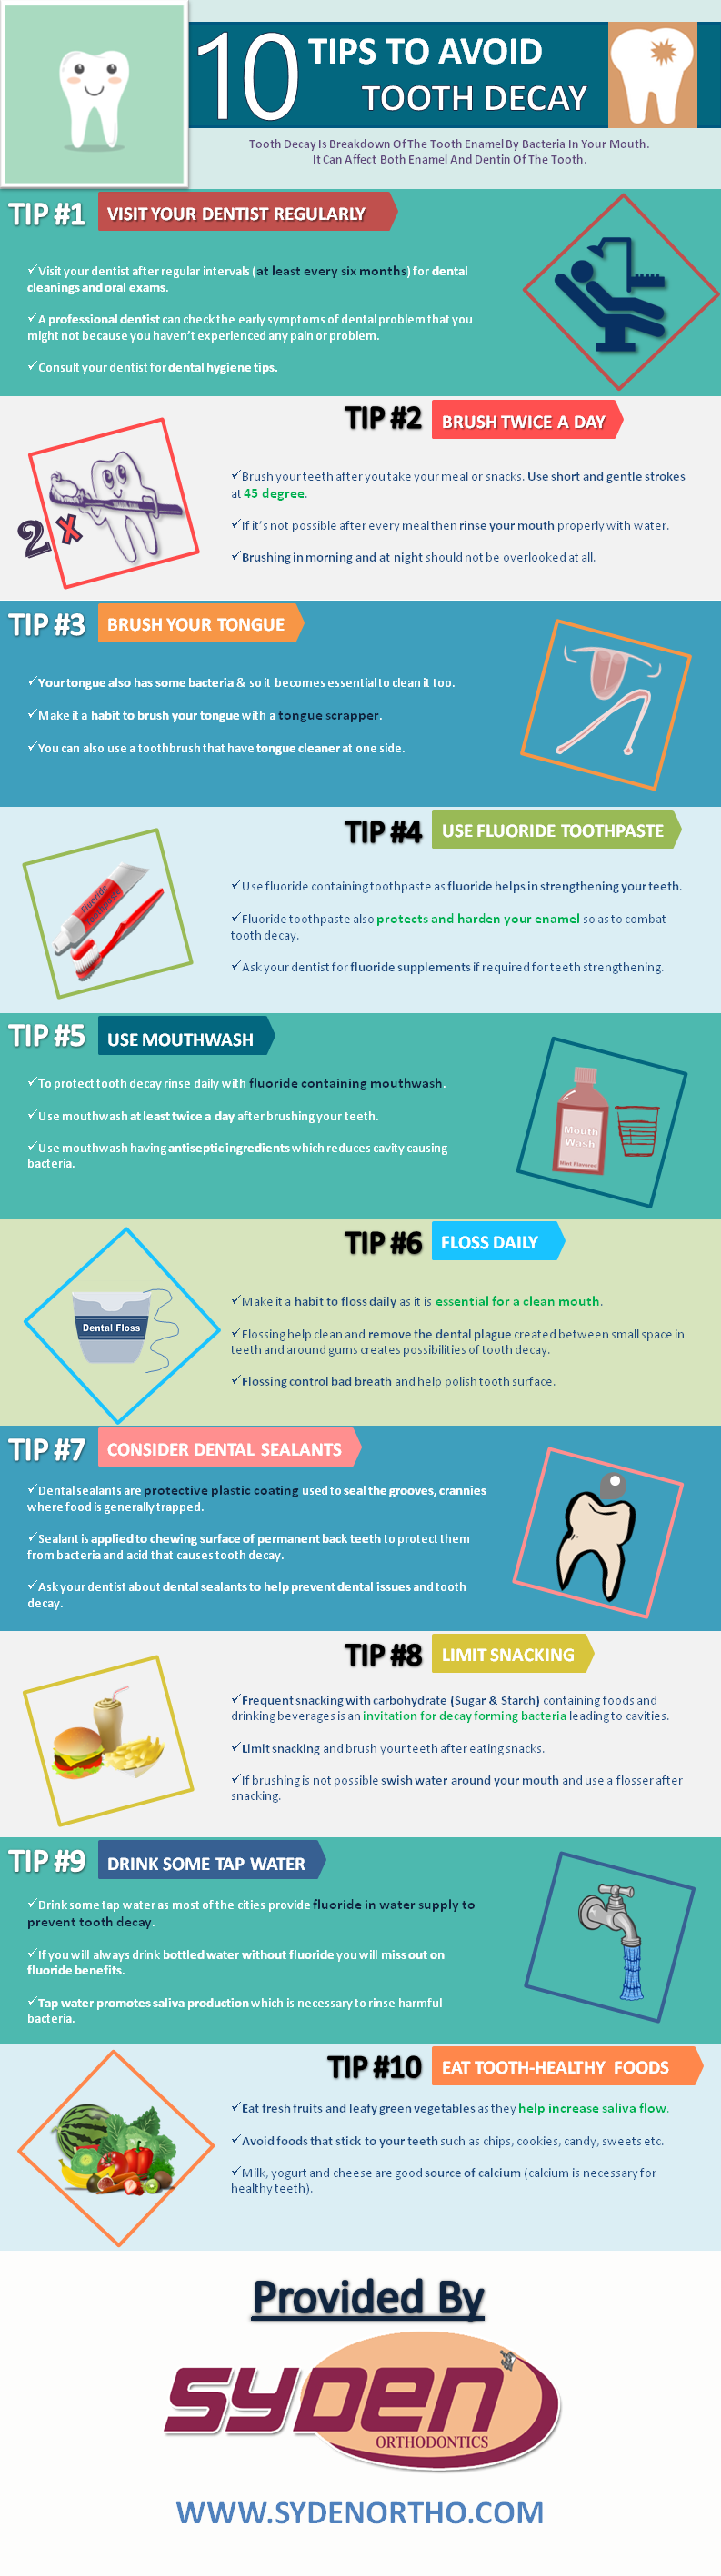 tips to avoid dental decay infographic - Ten Tips to Prevent Tooth Decay